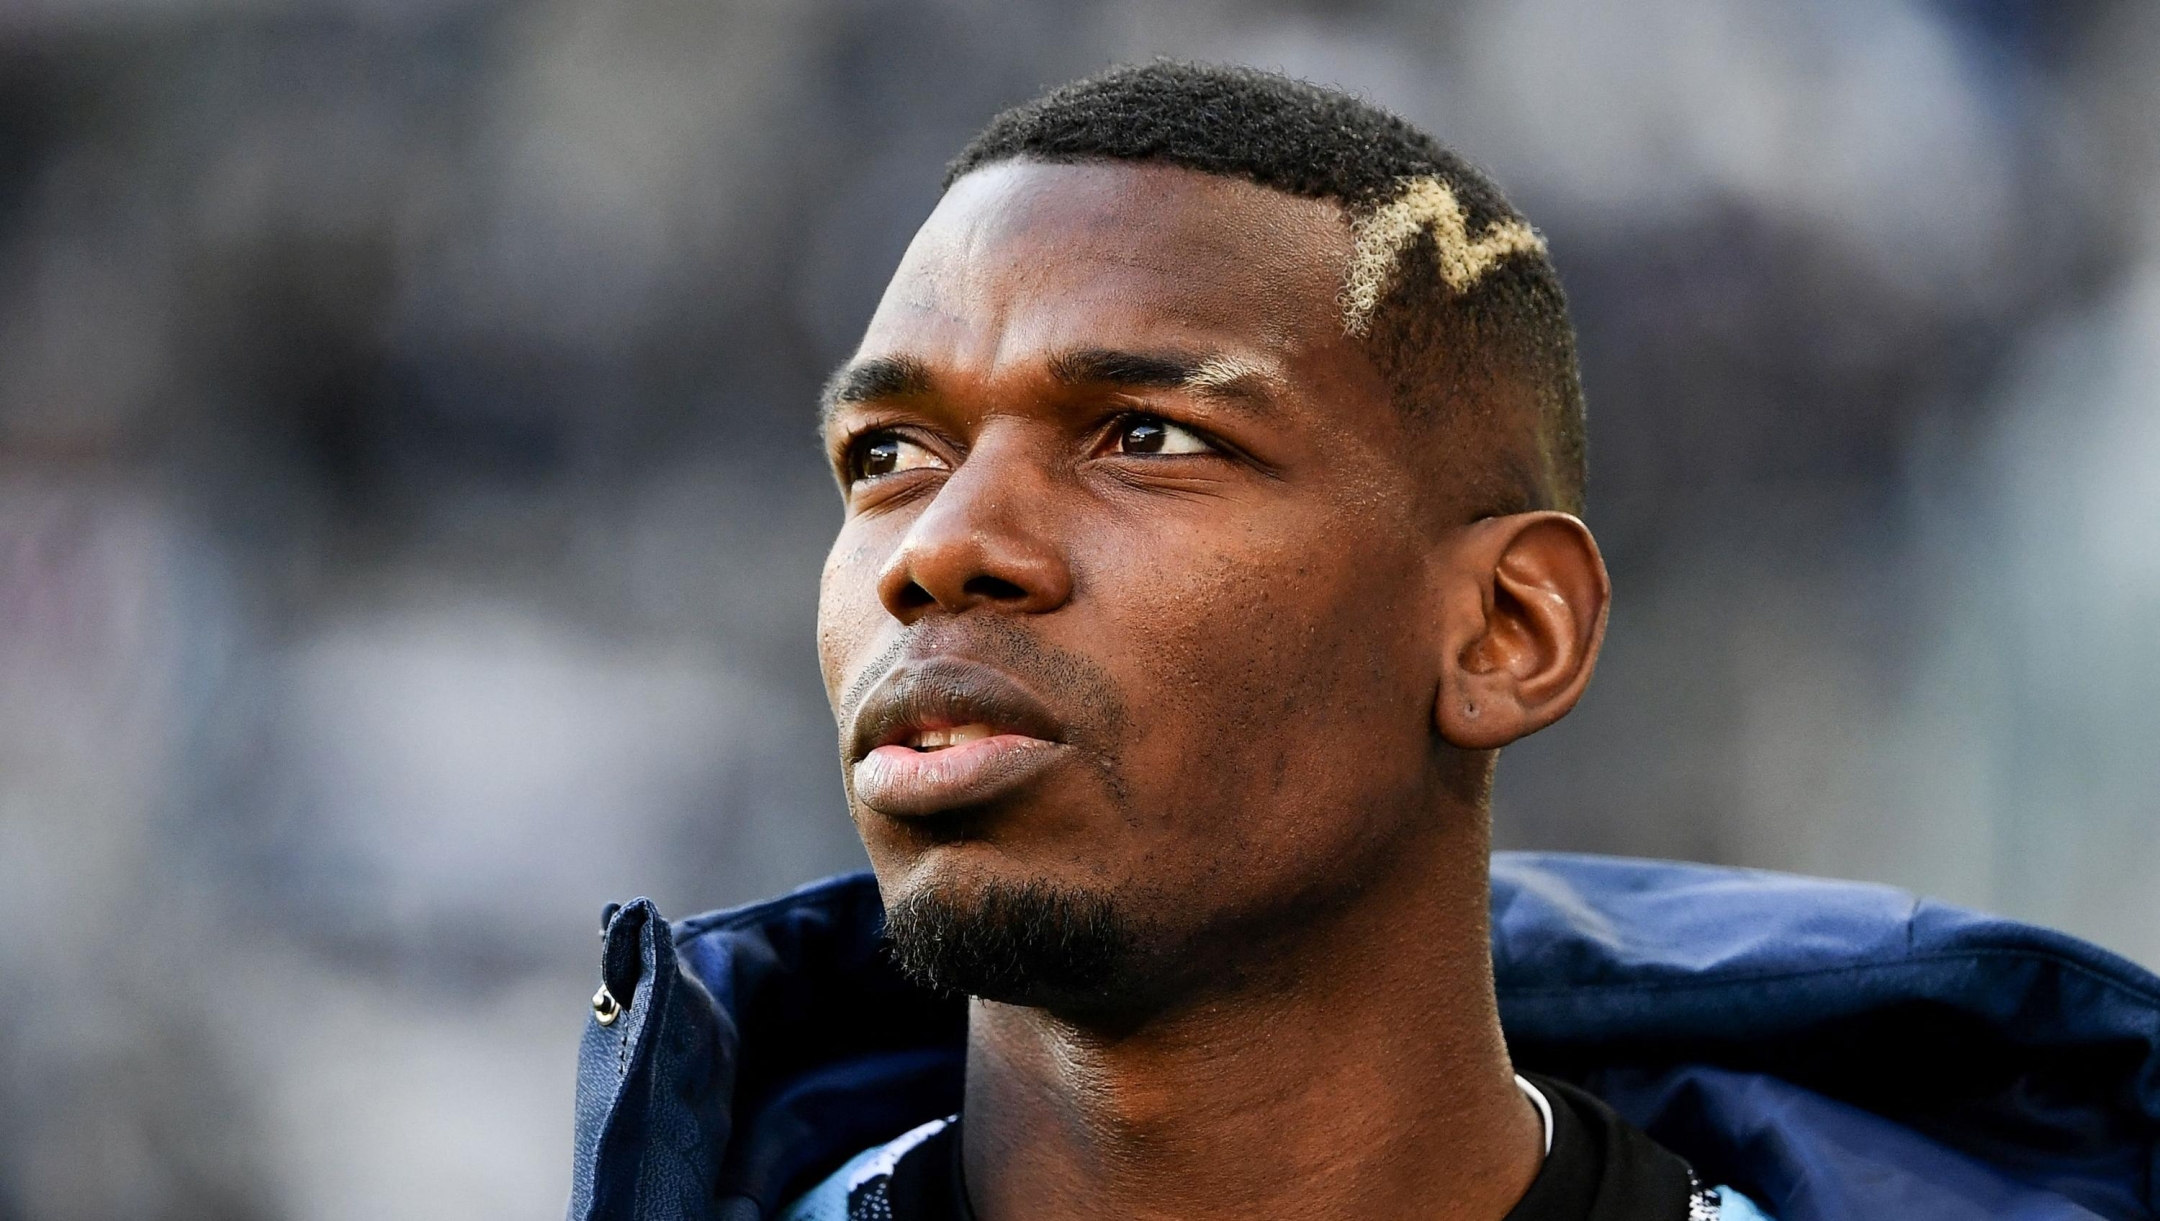 (FILES) Juventus' French midfielder Paul Pogba looks on prior to the Italian Serie A football match between Juventus and Monza at the Juventus Stadium in Turin on January 29, 2023. France's World Cup winner Paul Pogba is facing the possibility of a lengthy ban after Italy's national anti-doping tribunal called for a four-year suspension for the Juventus midfielder, a club source told AFP on December 7, 2023. (Photo by Isabella BONOTTO / AFP)